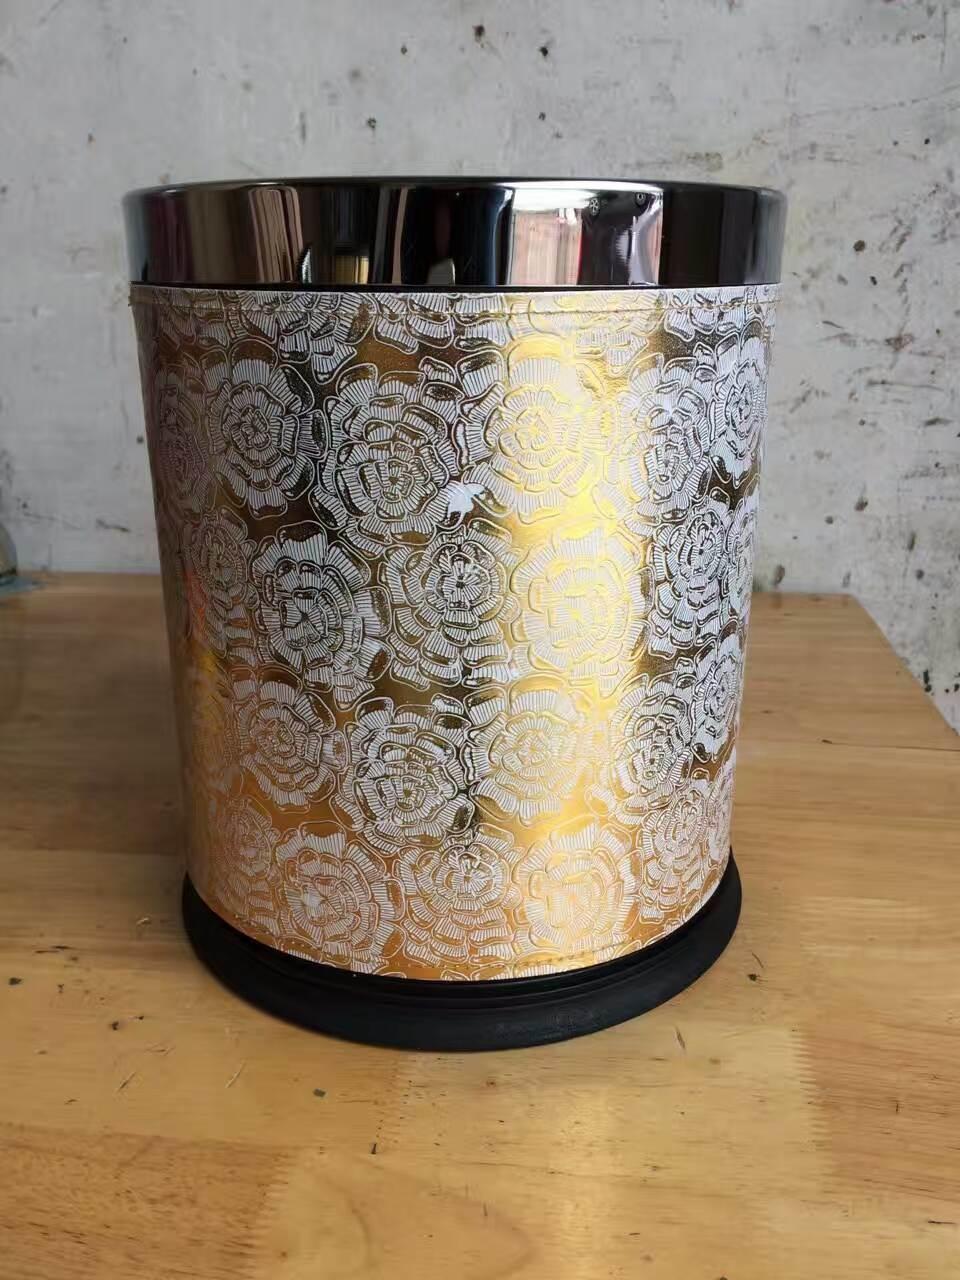 Household Living Room Storage Leak-Proof PP Flame-Retardant Non-Rusting Trash Can Without Lid